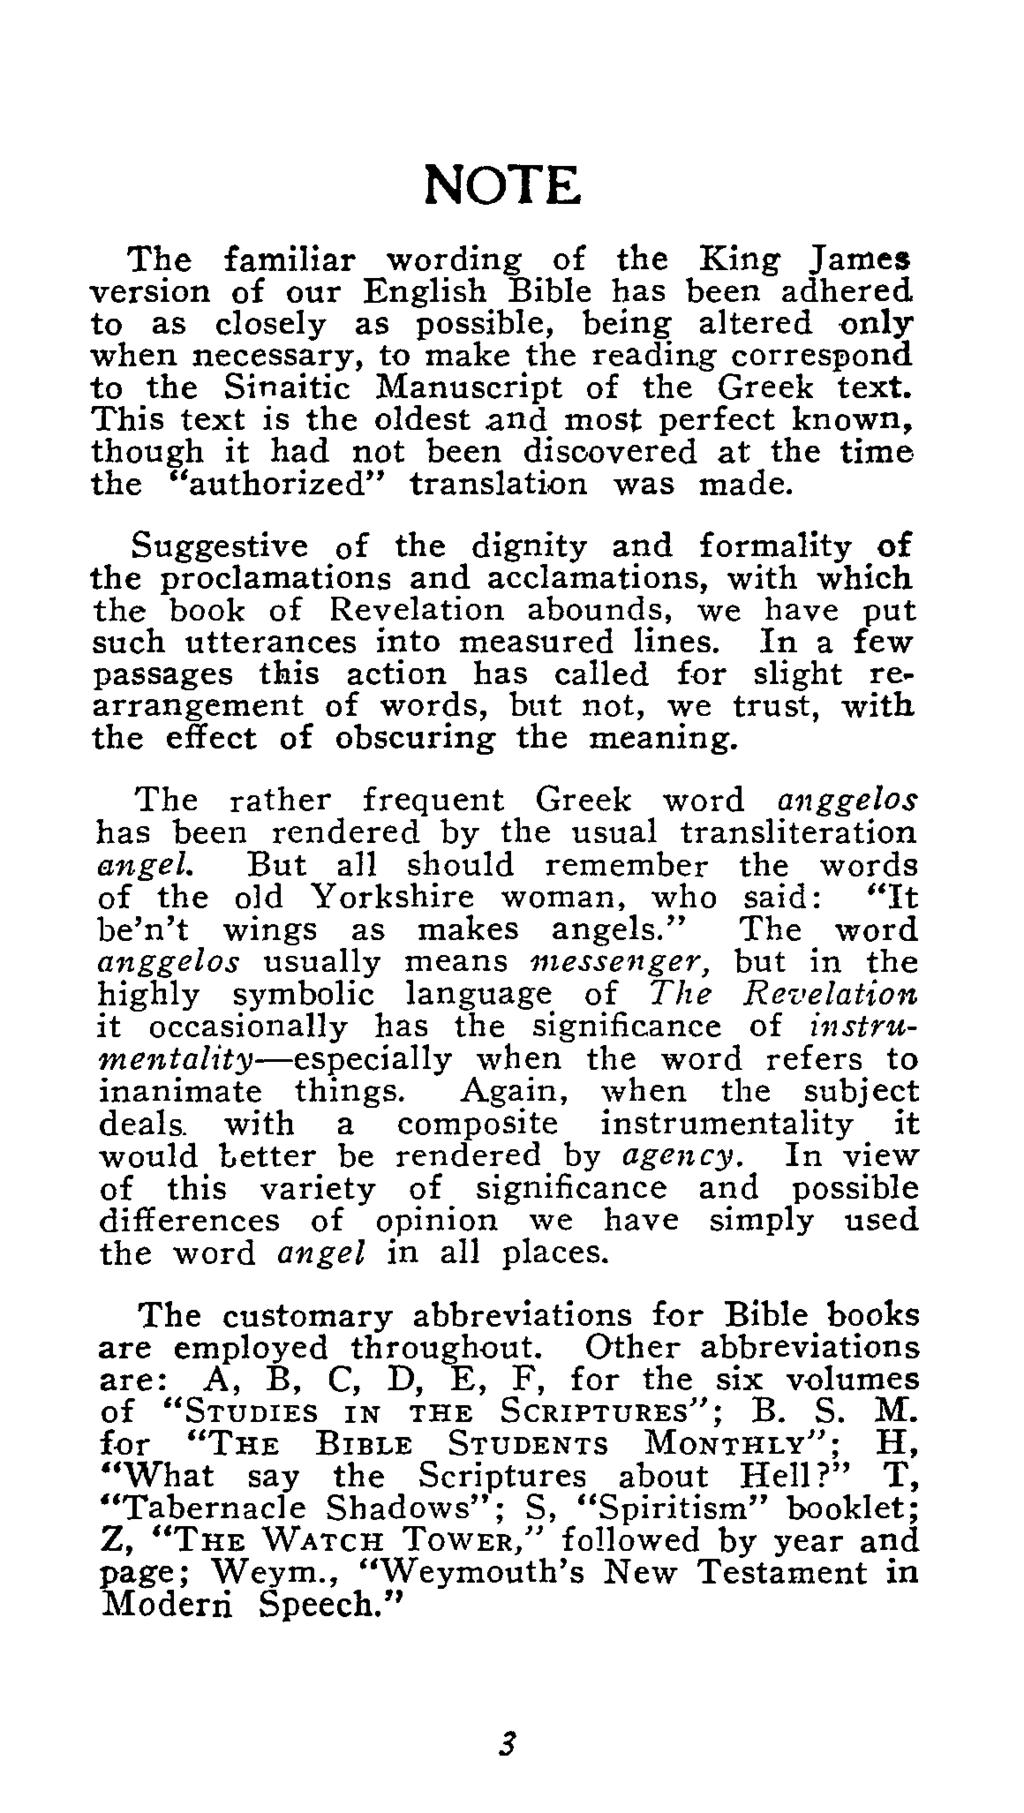 NOTE The familiar wording of the King James version d of our English Bible has been adhere to as closely as possible, being altered only when necessary, to make the reading correspond to the Sinaitic